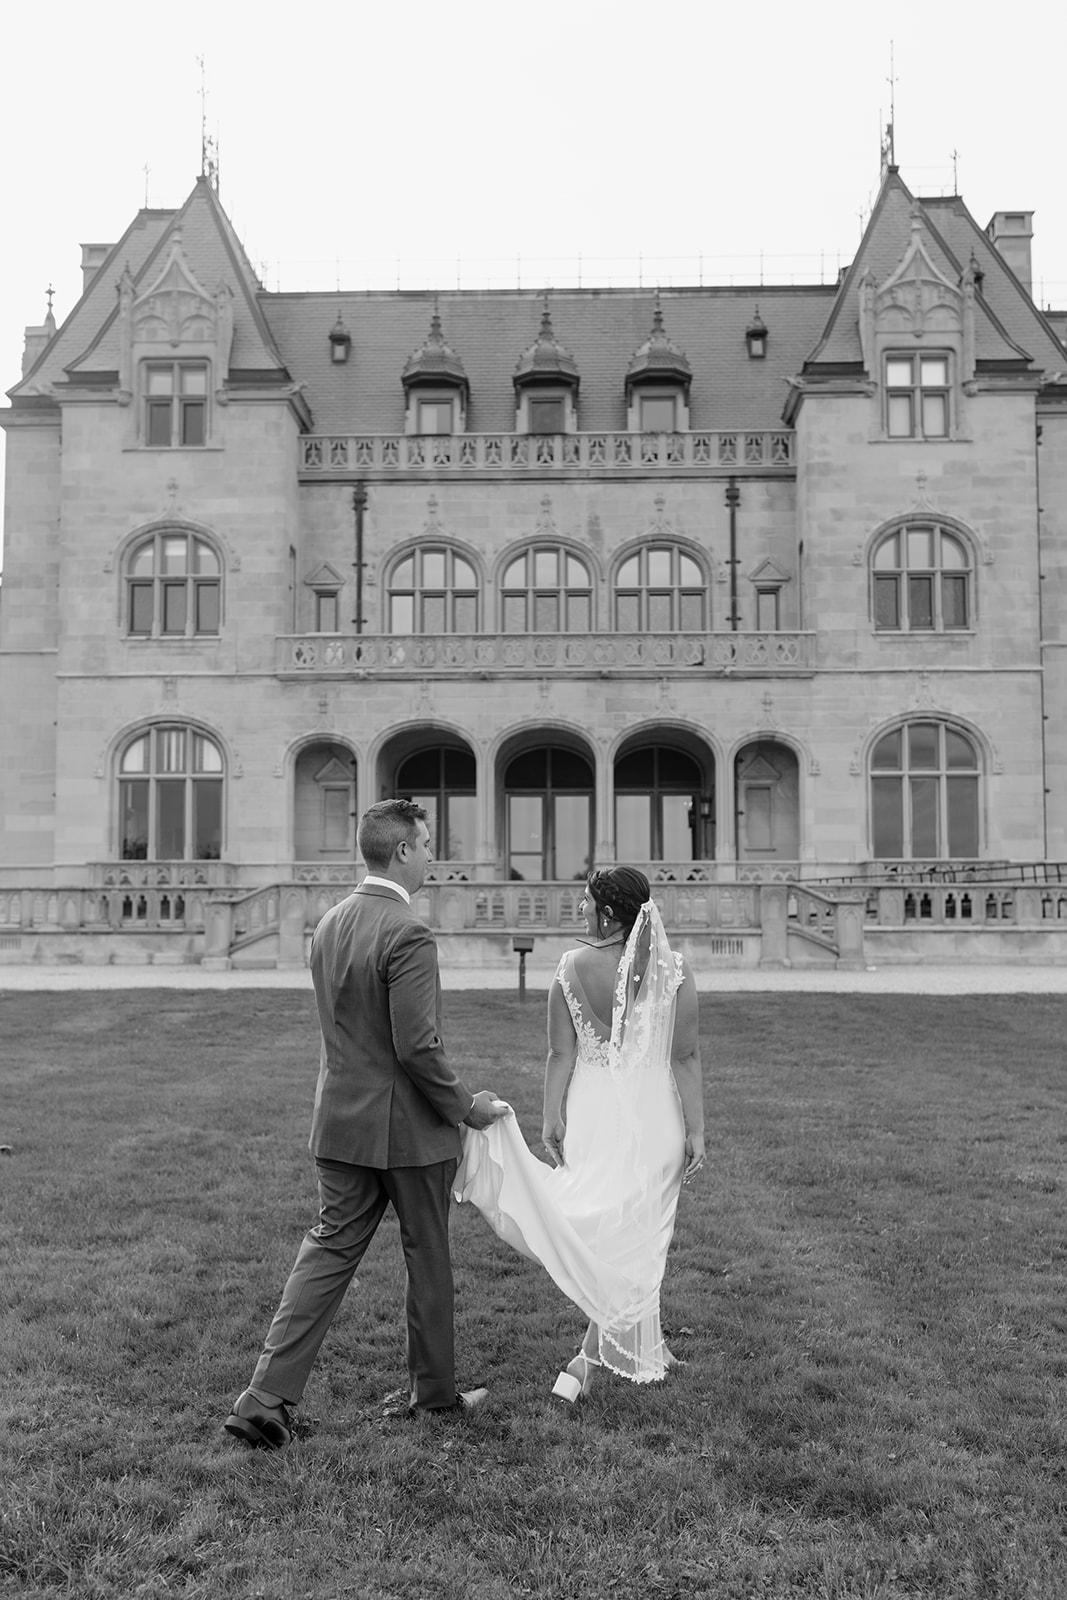 Gorgeous bride and groom pose outside their dreamy New England wedding venue